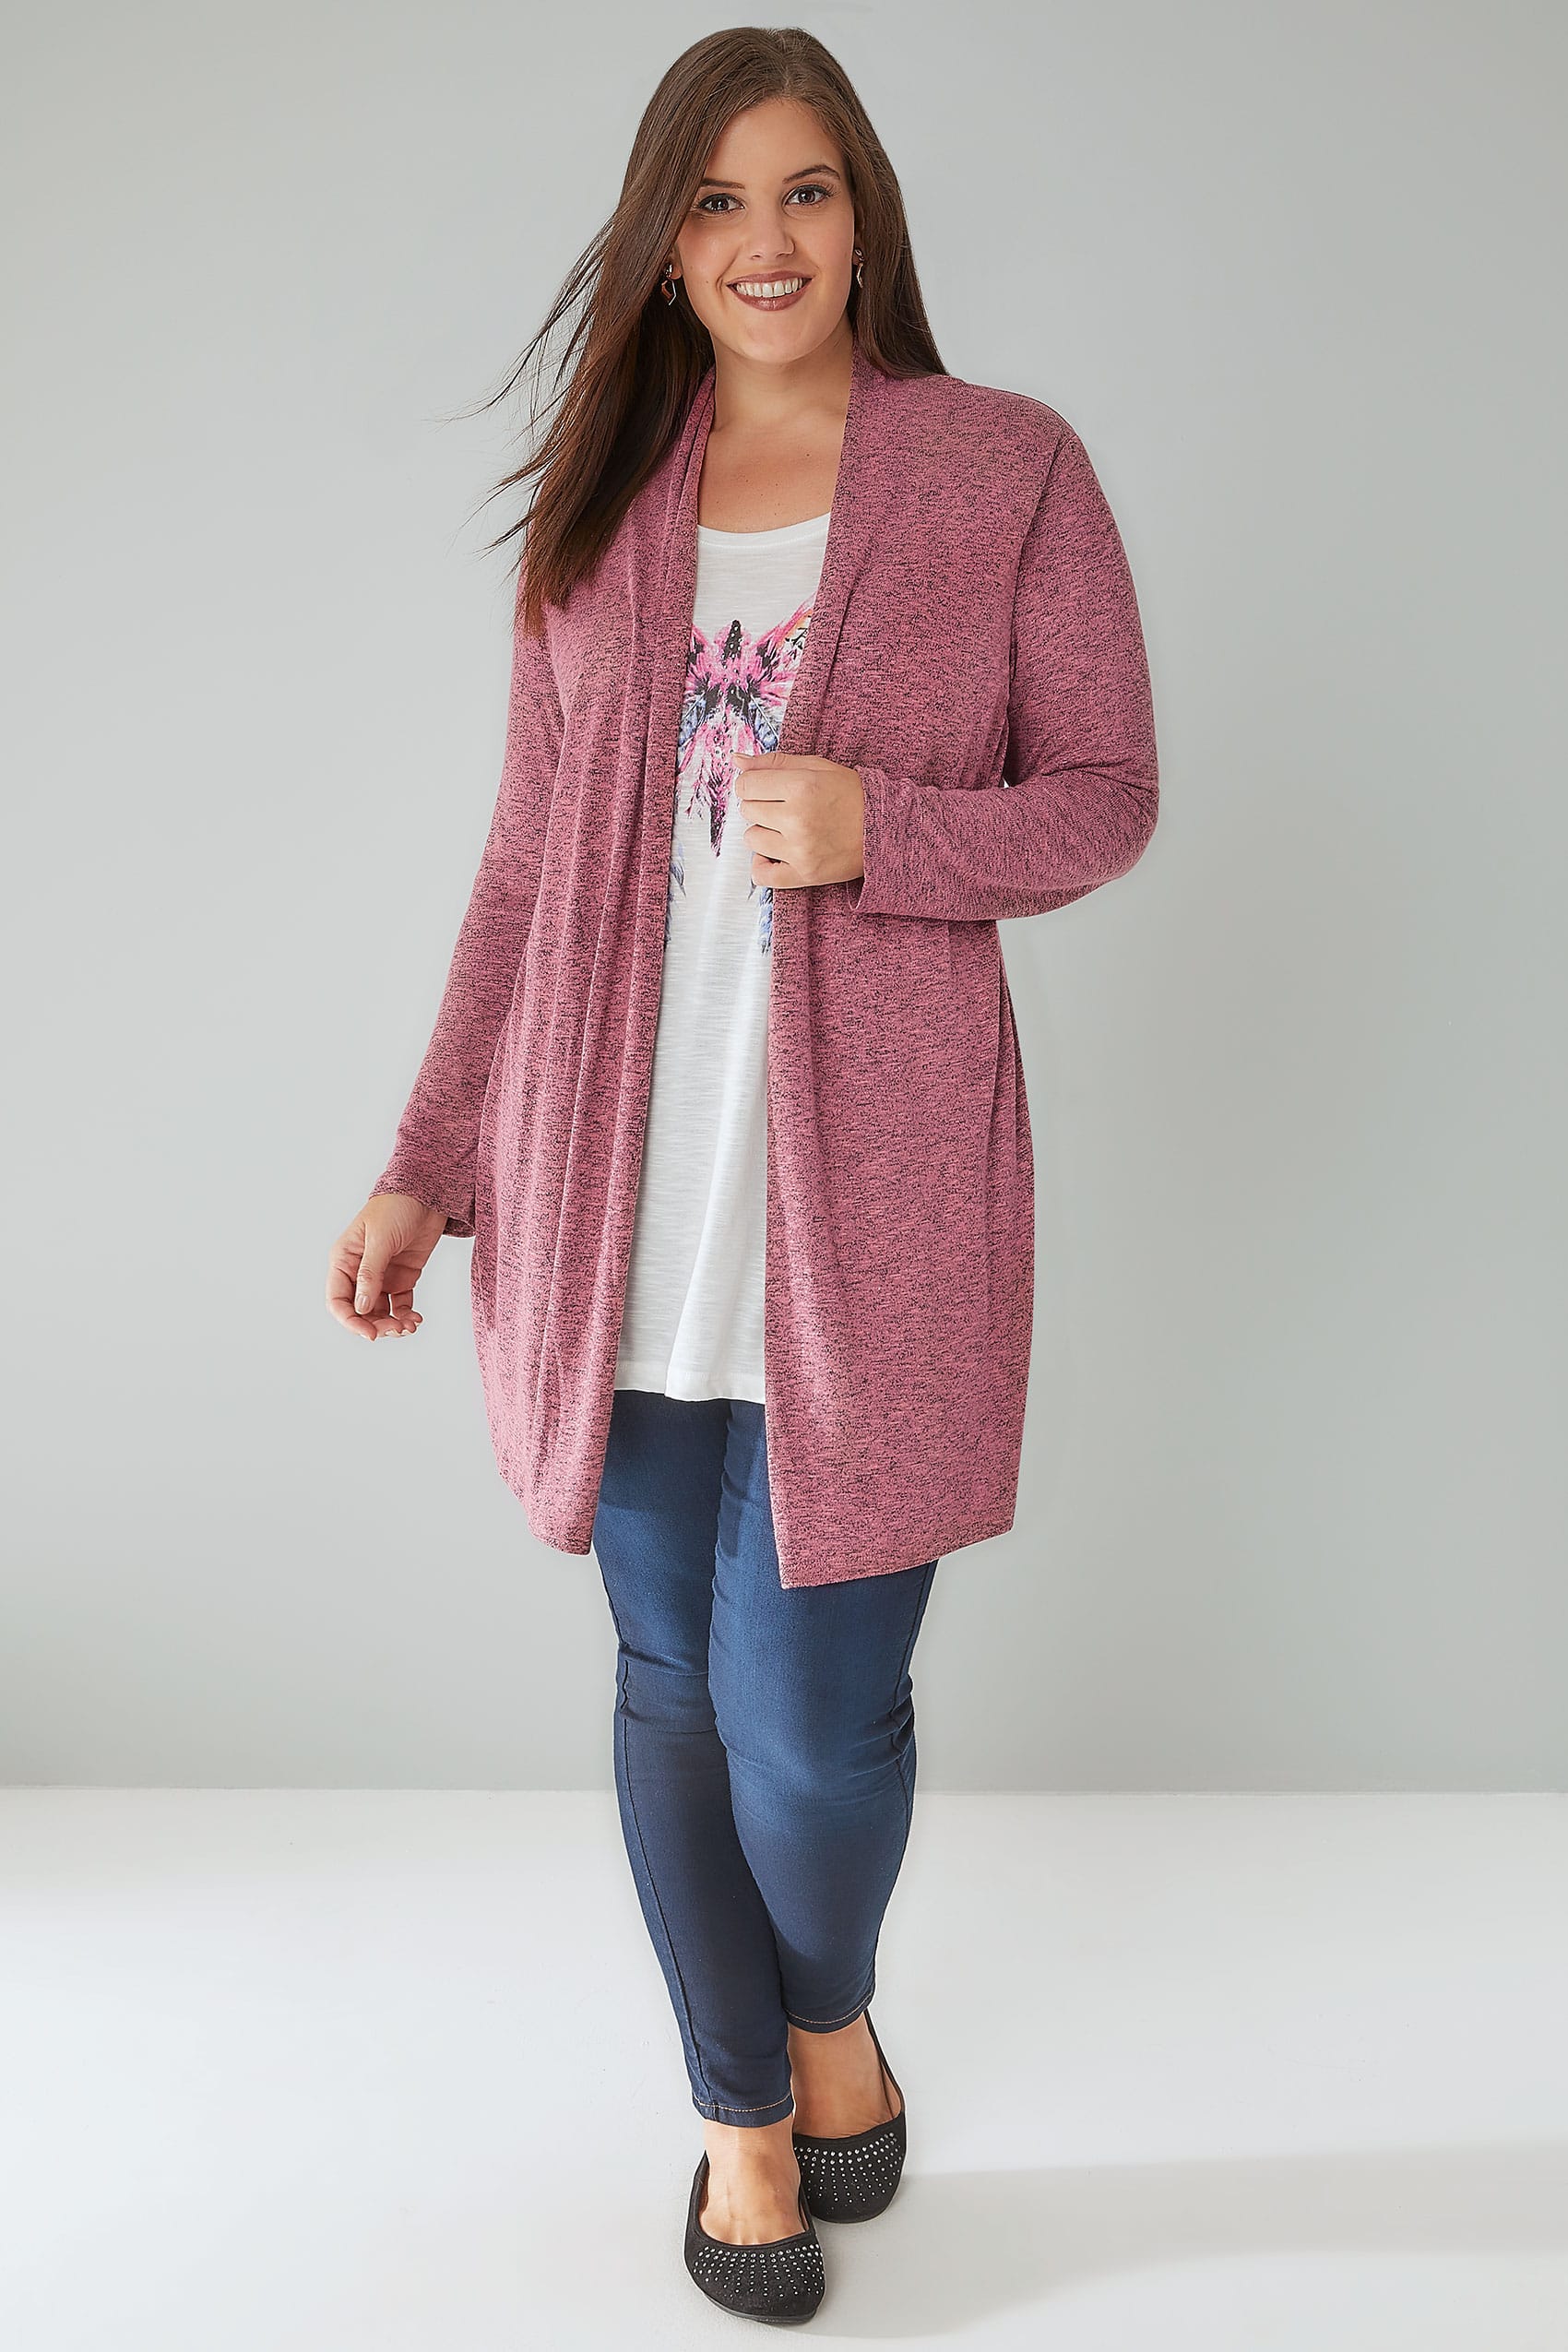 Rose Pink & Multi 2 In 1 Fine Knit Cardigan & Butterfly Print Top, Plus ...